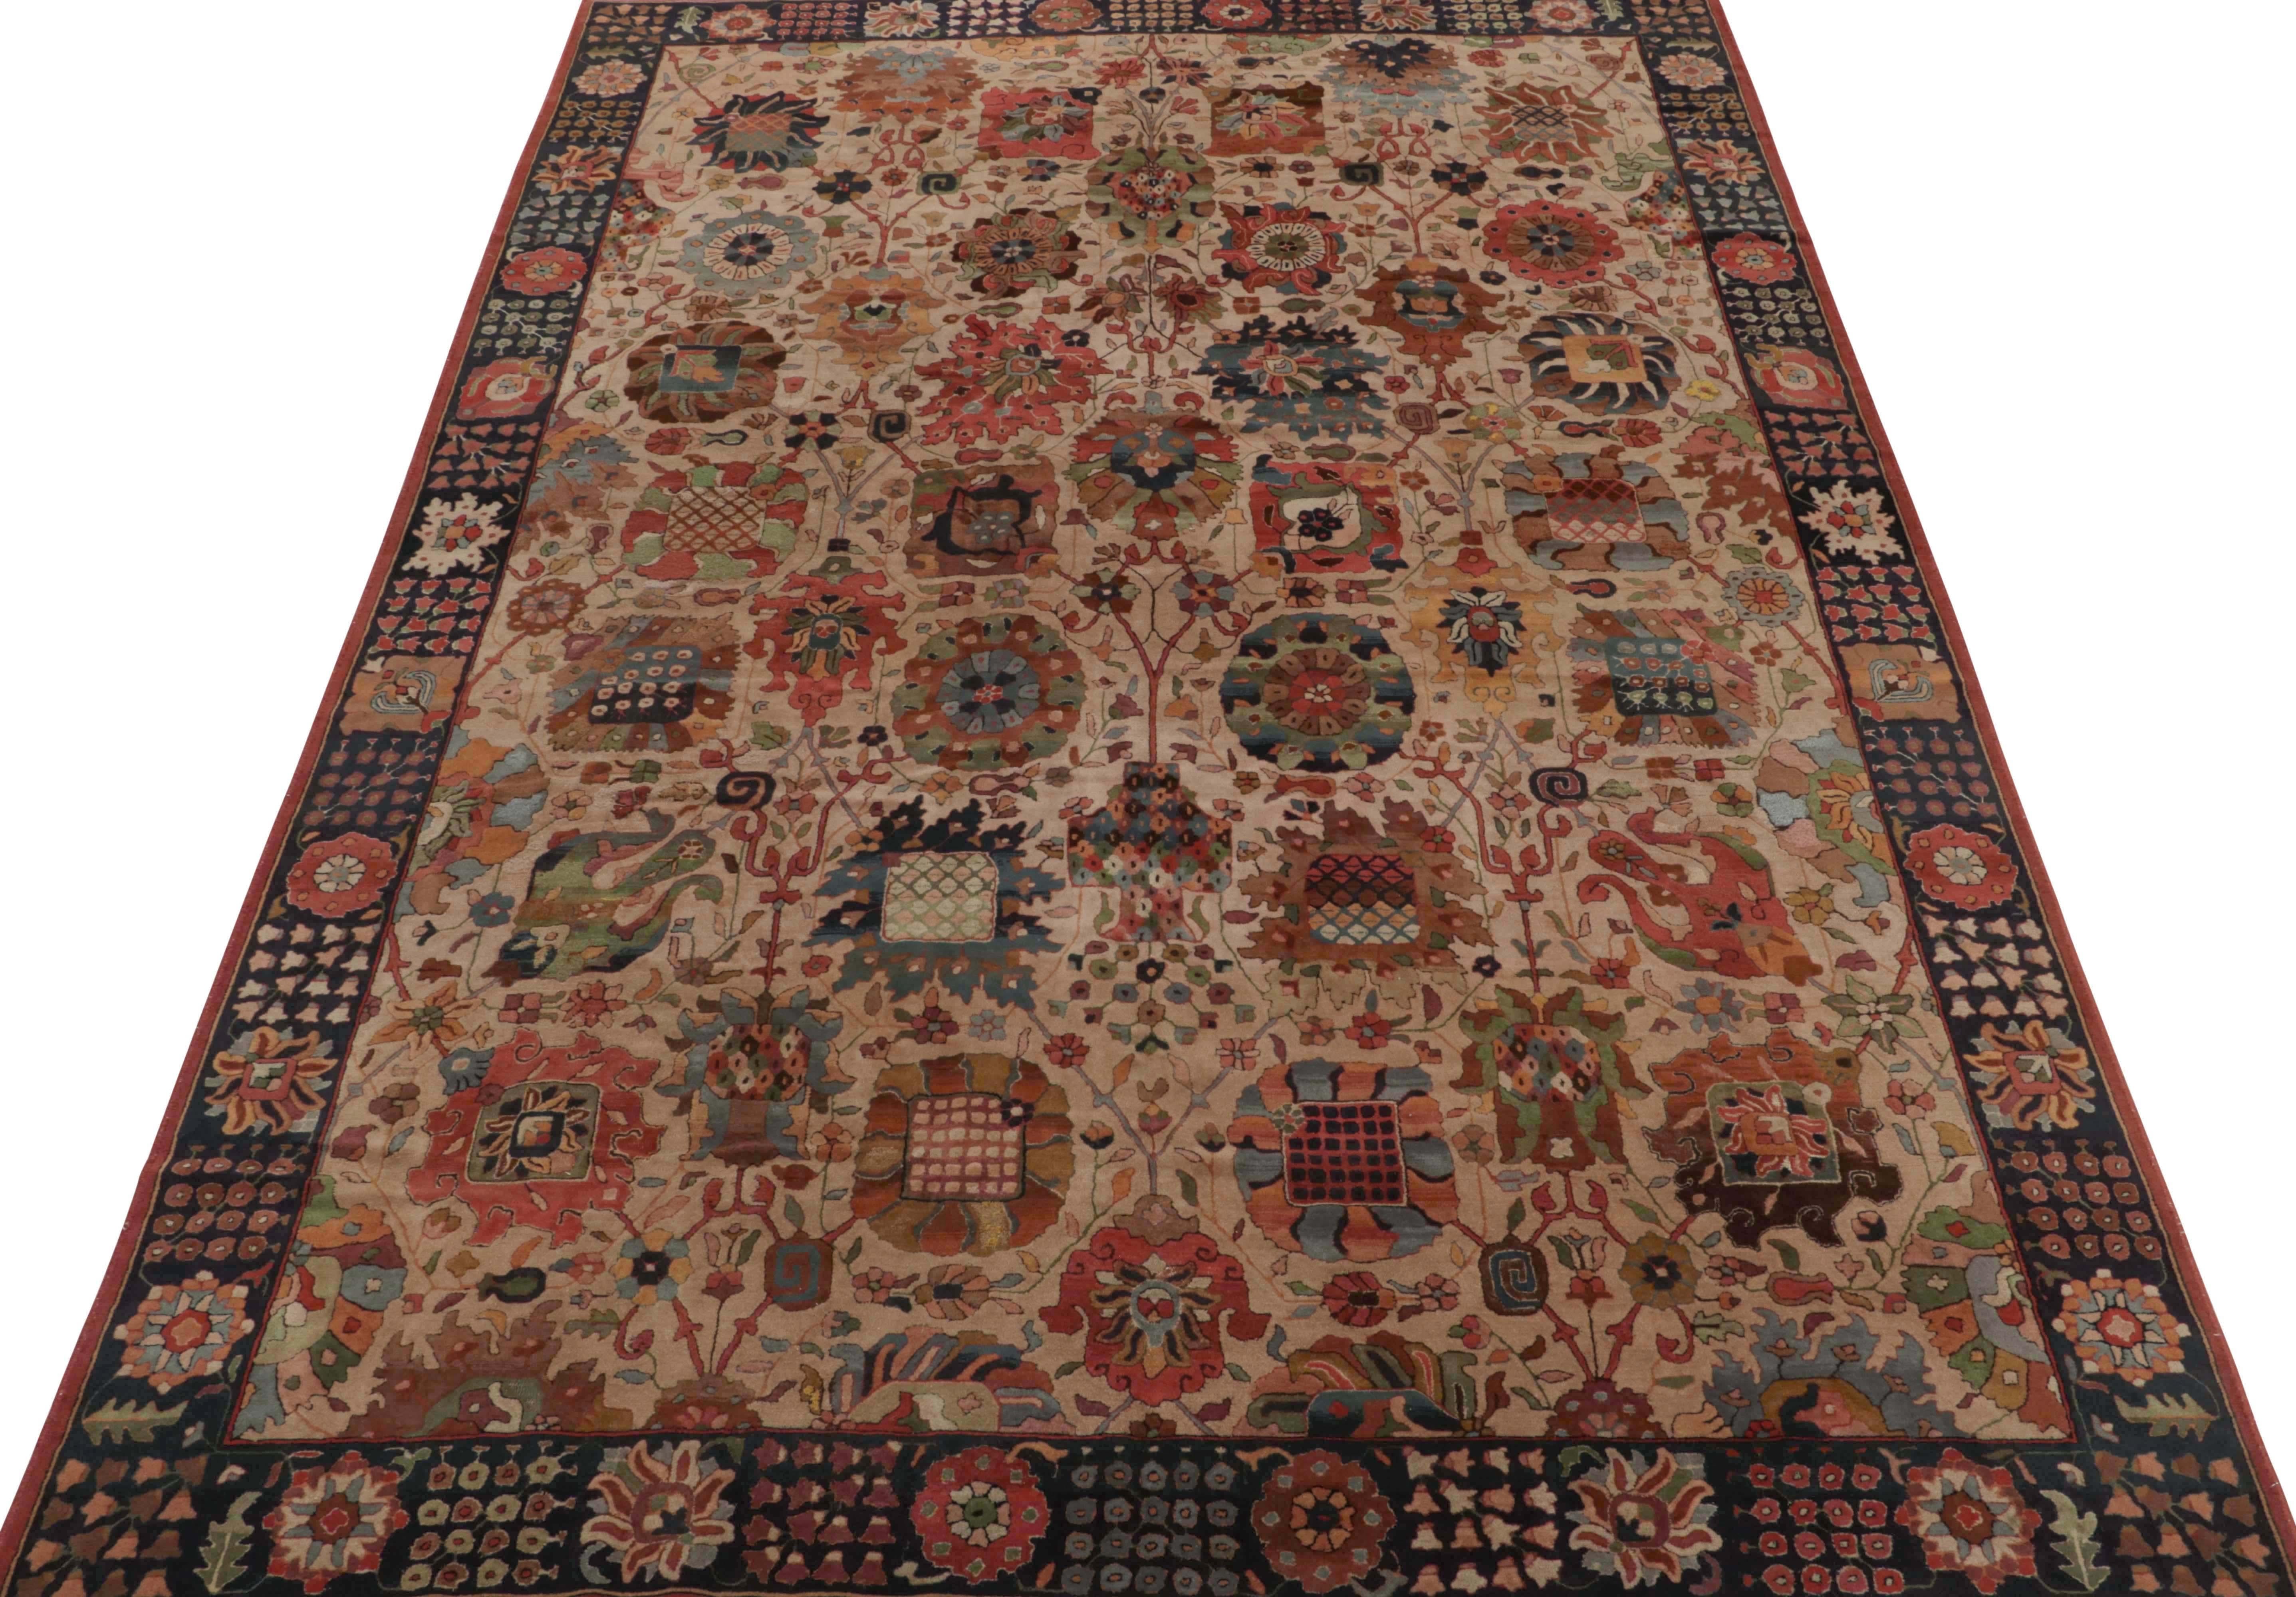 German Antique Hand-Hooked Rug in Brown Red and Green Floral Patterns by Rug & Kilim For Sale